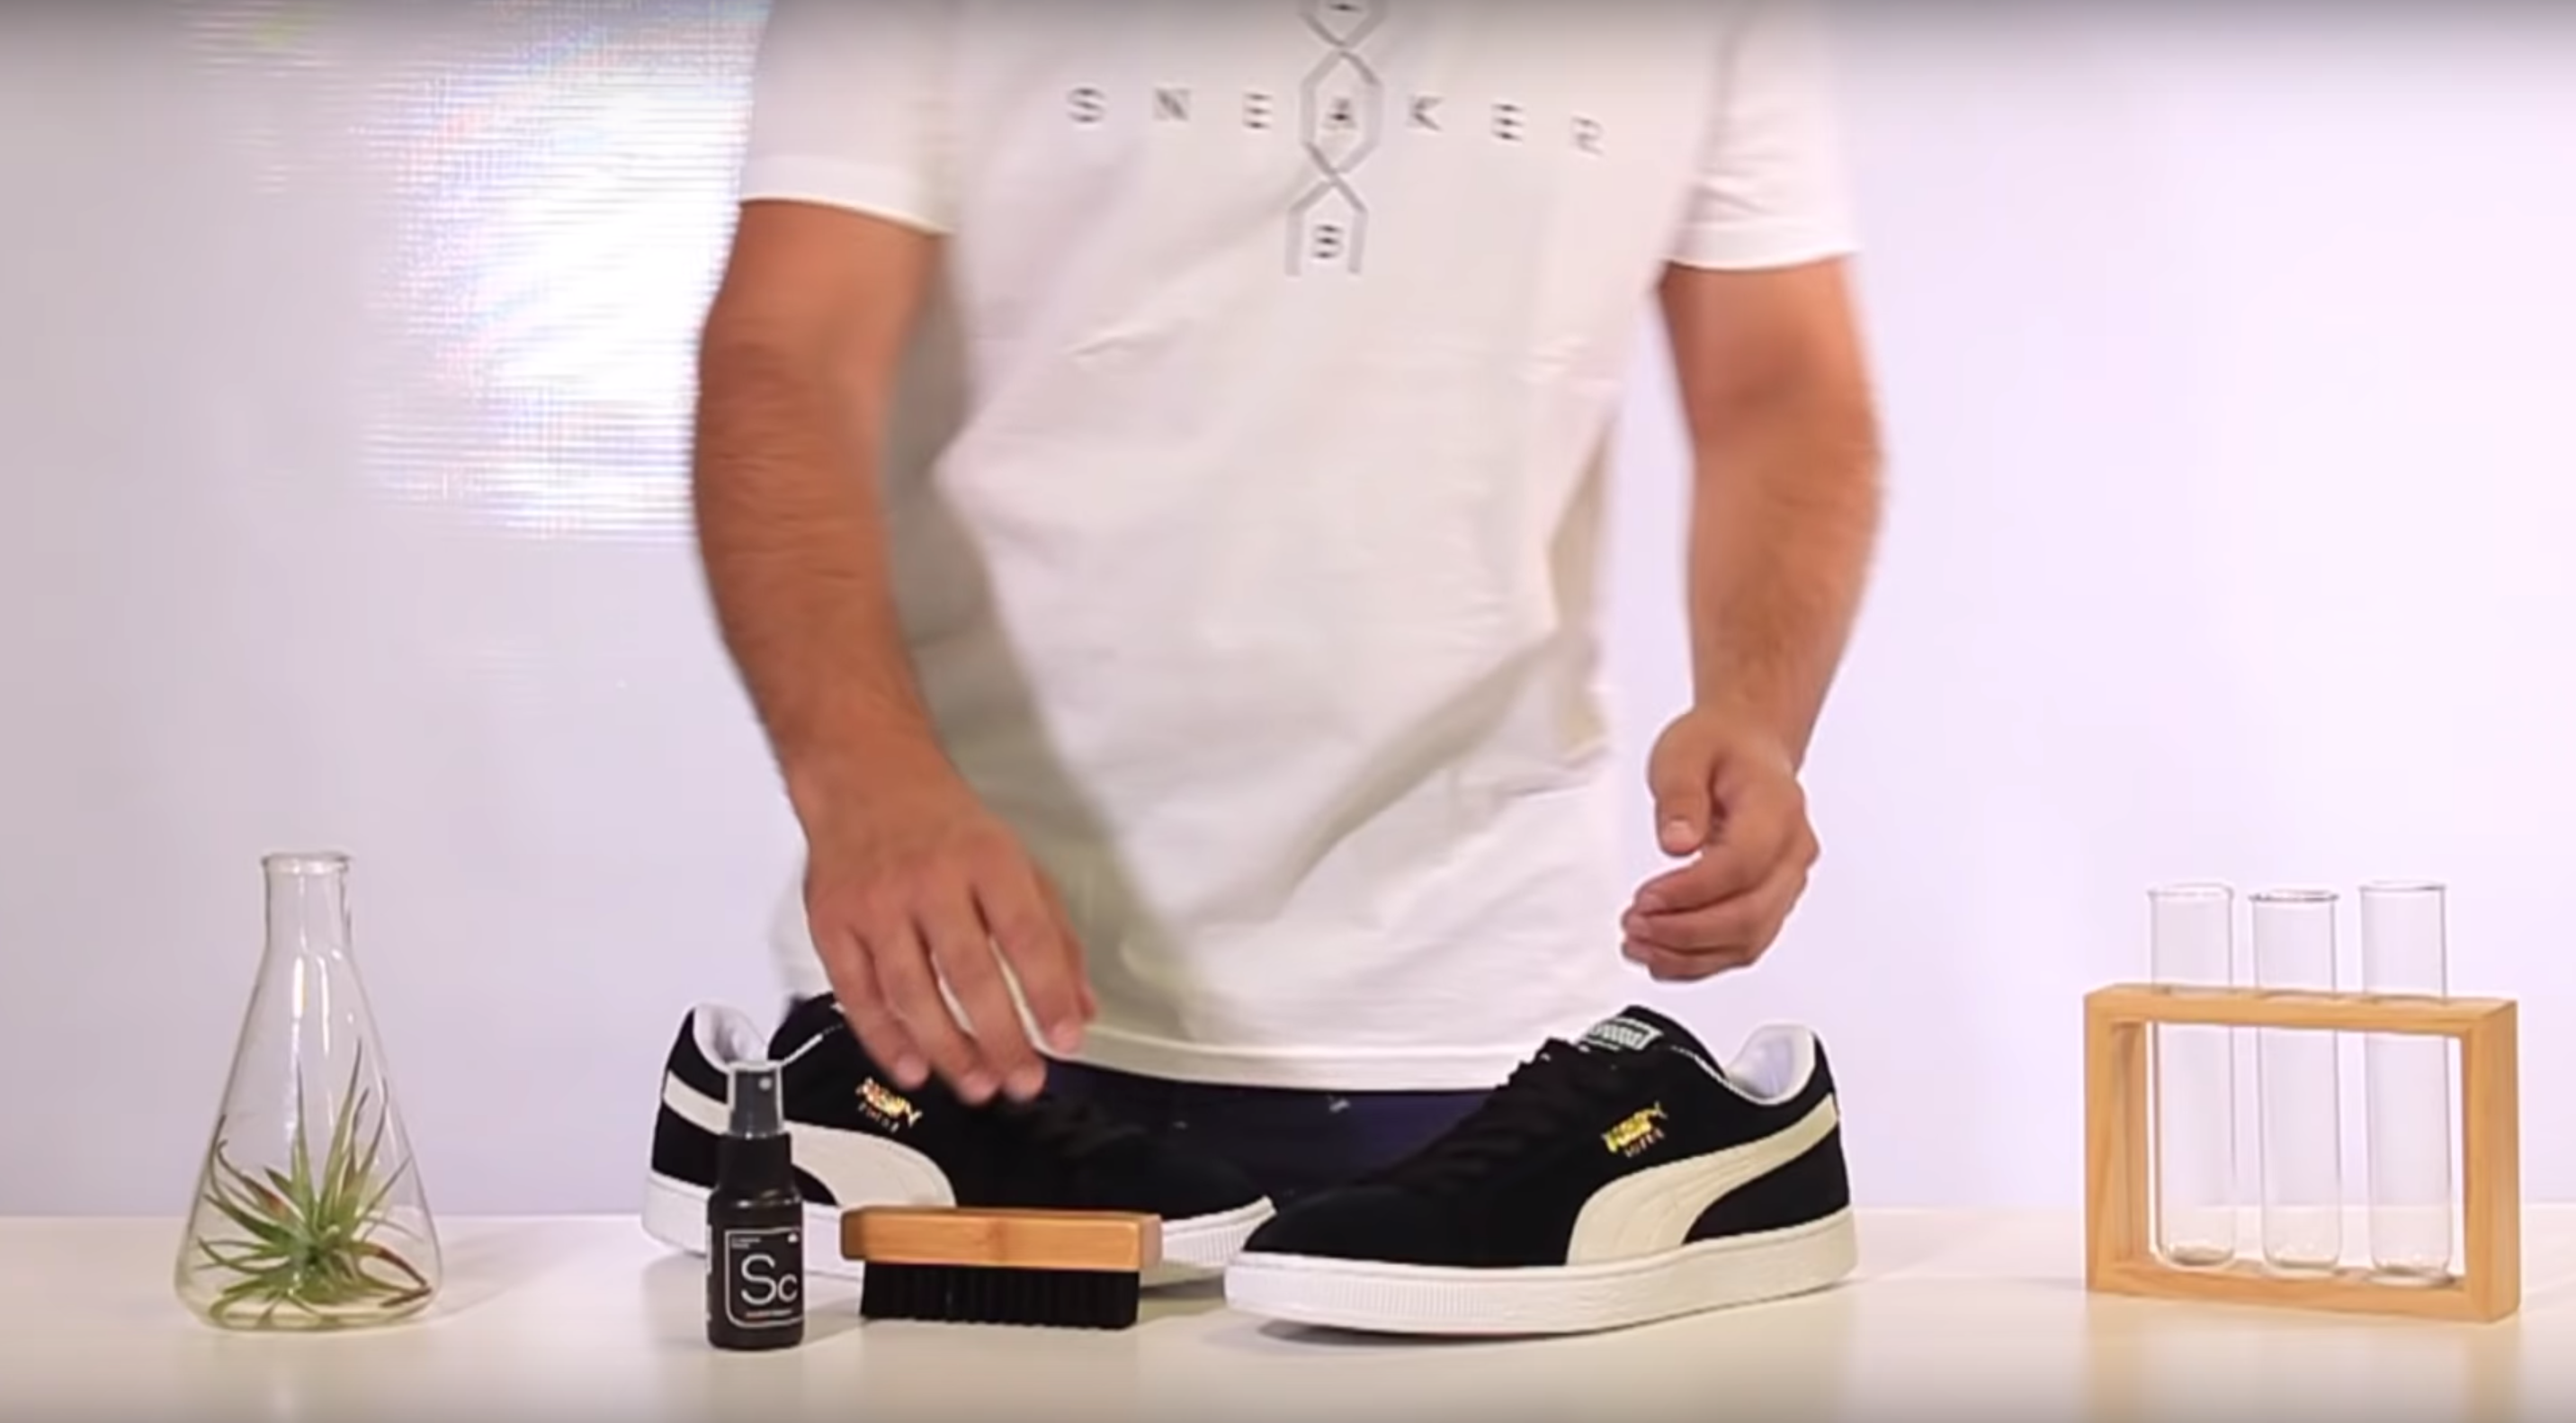 gramática Persona enferma trolebús How To Clean Suede PUMA Shoes With Sneaker Cleaner – Sneaker LAB